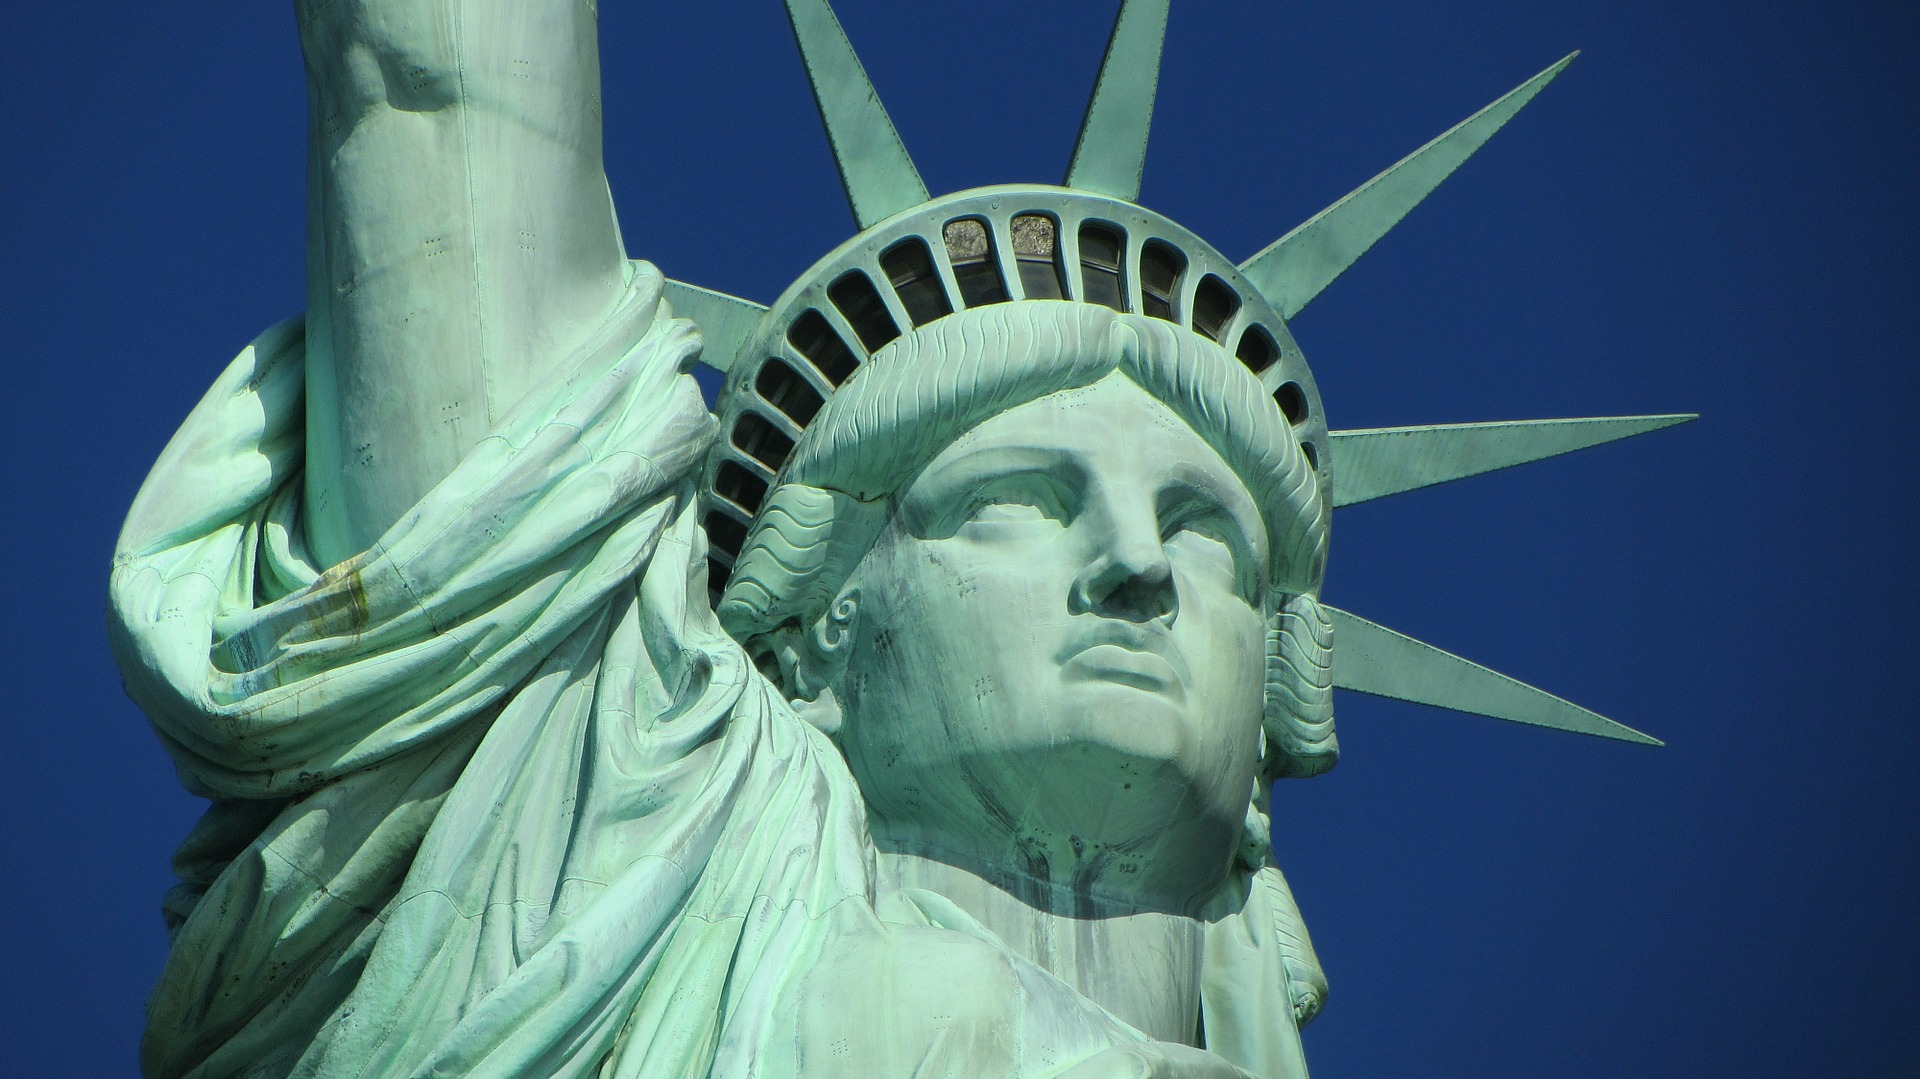 10 Interesting Facts About the USA